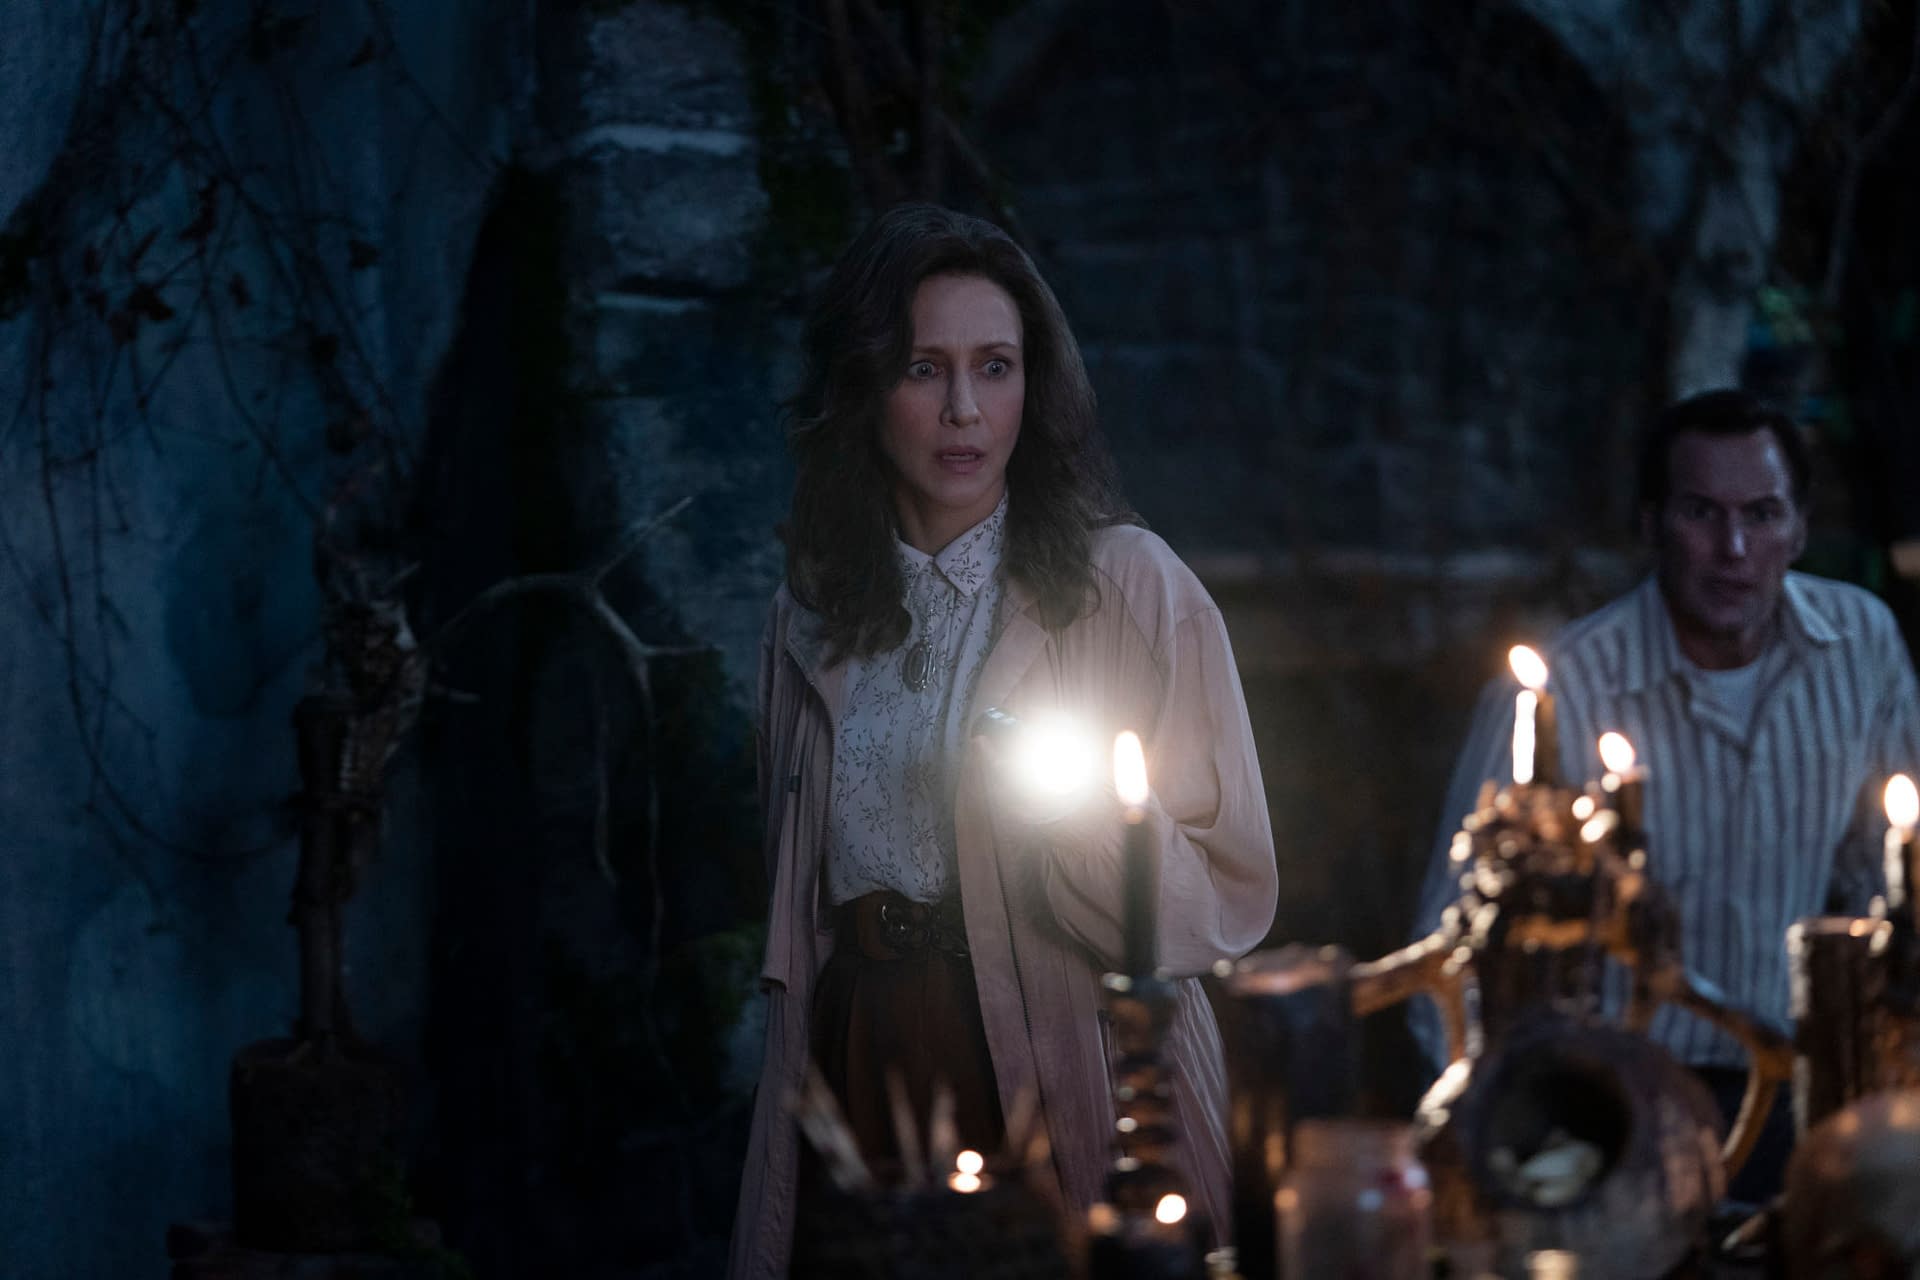 The Conjuring: The Devil Made Me Do It Drops A Ton Of New Images